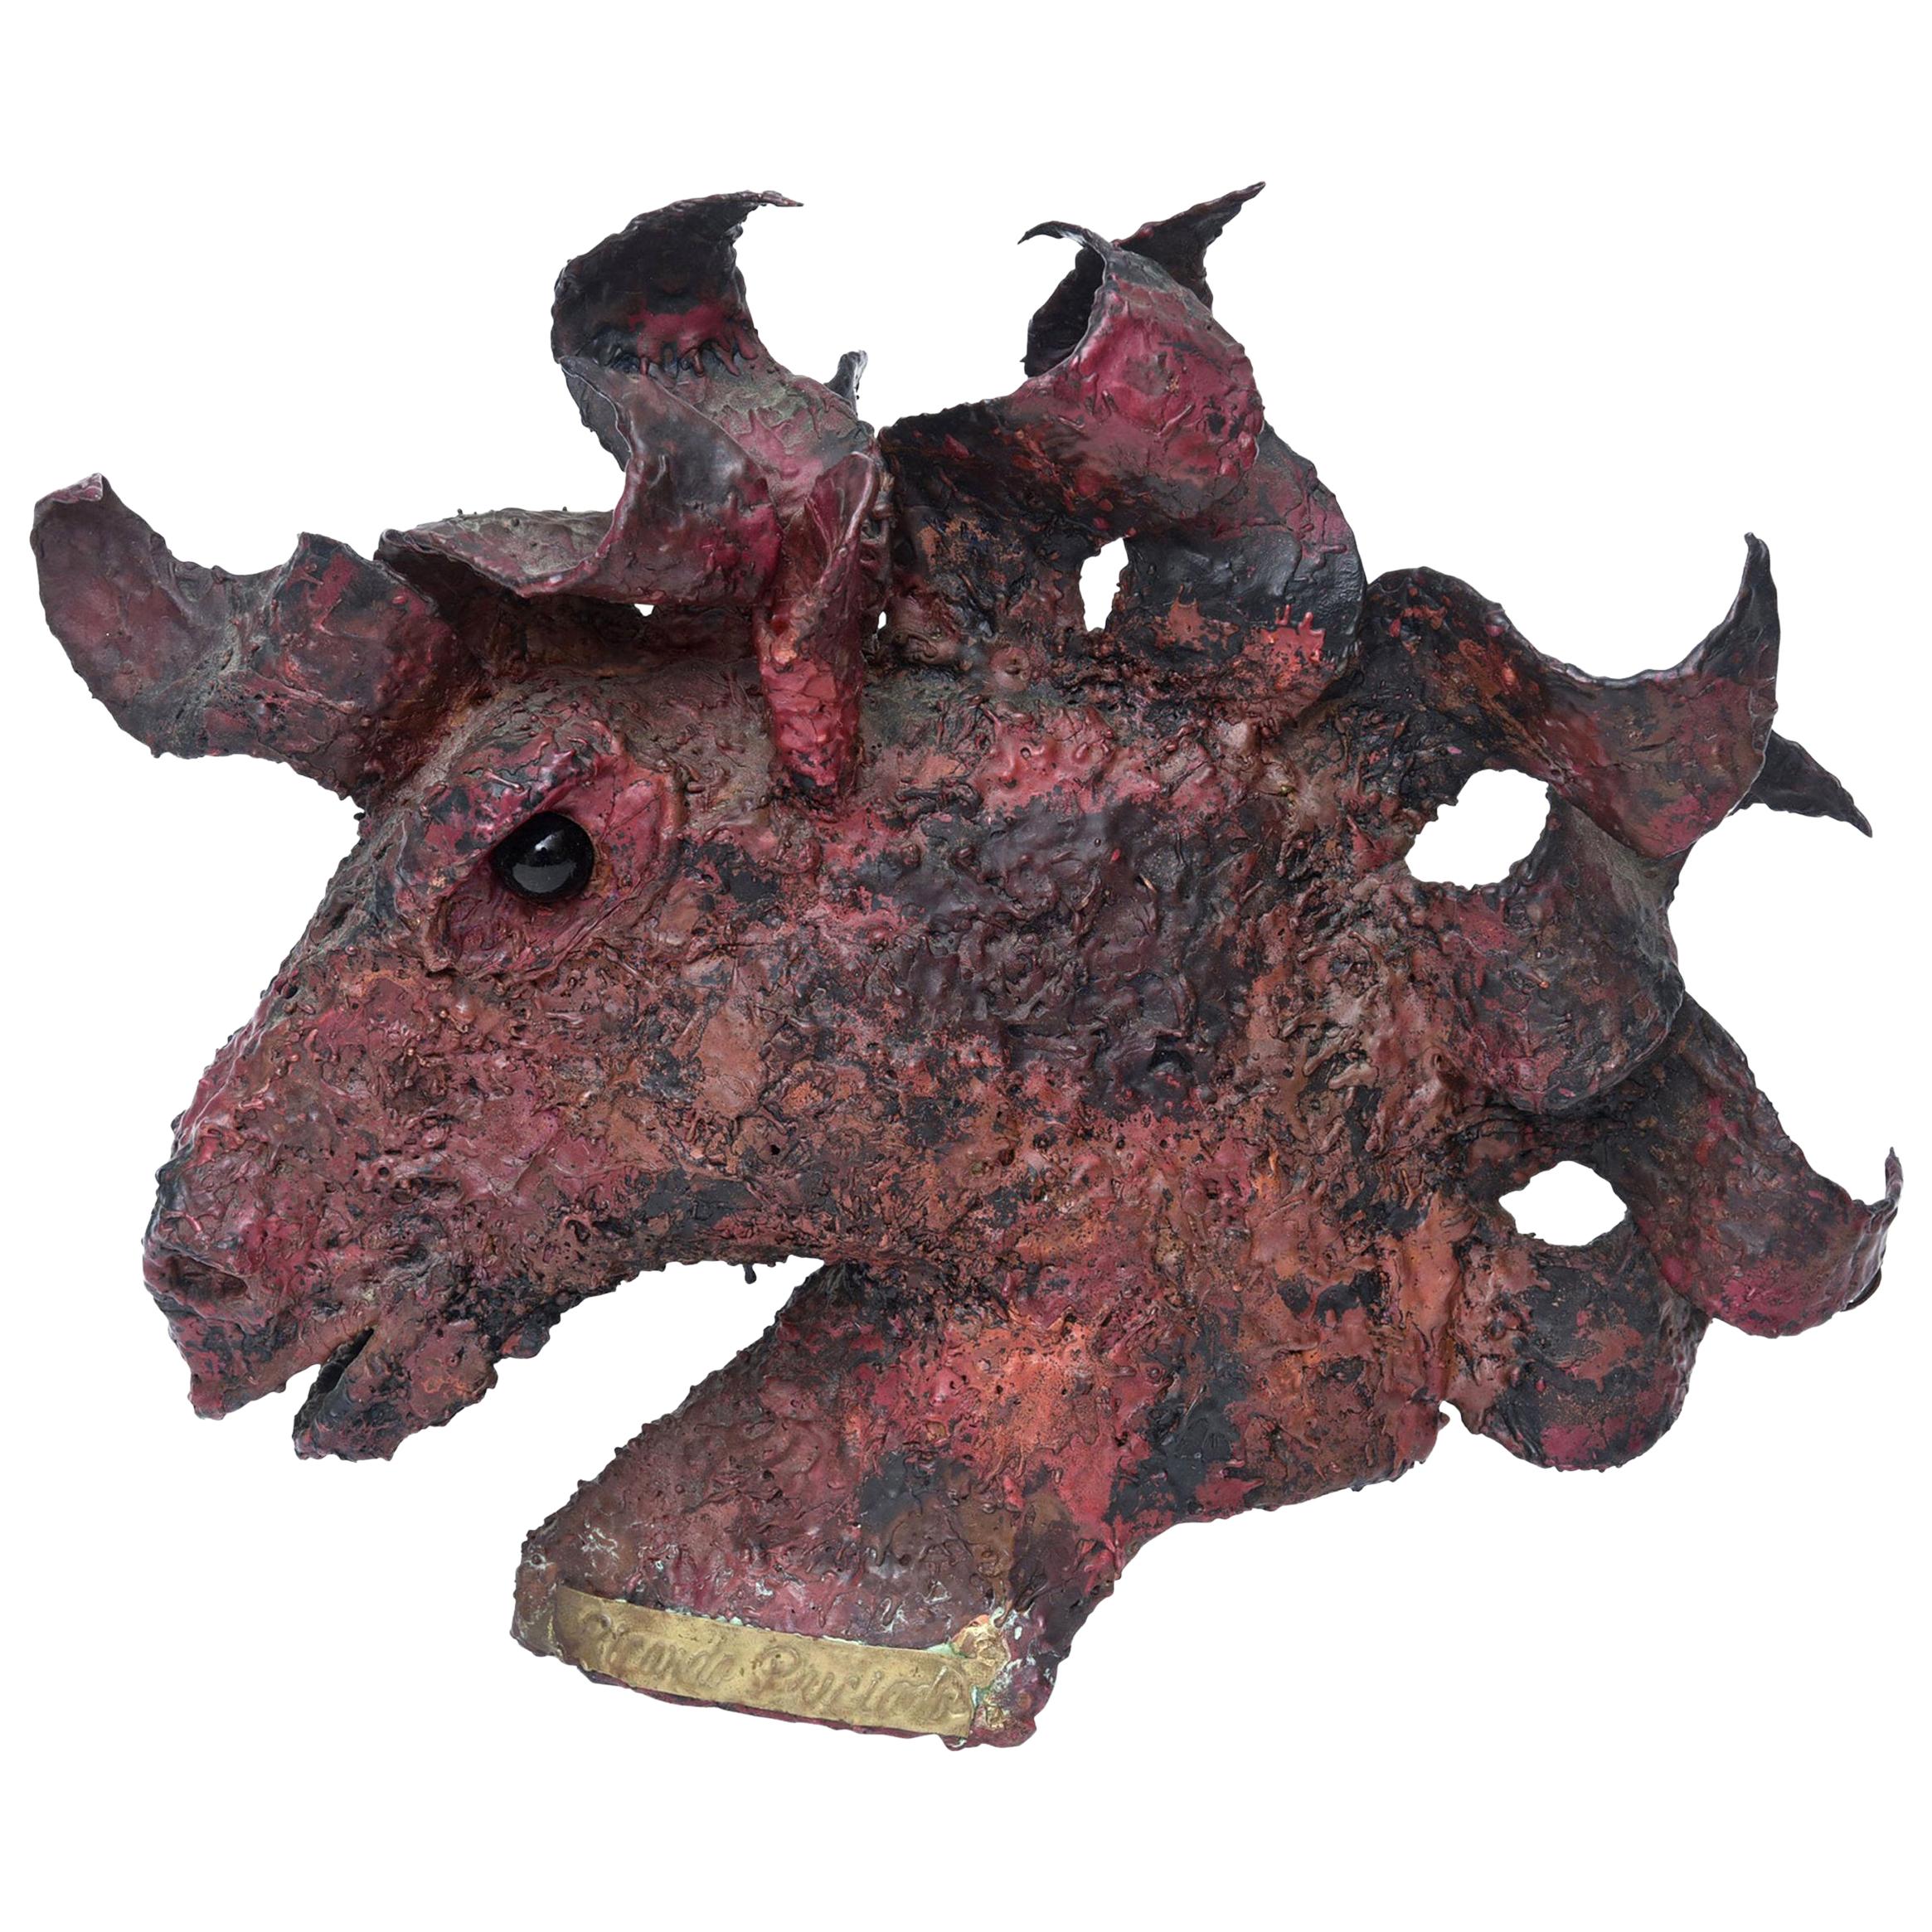 This heavy signed horse head sculpture has a metal plate that is signed by Ricardo Preciado. The use of dramatic paint over the bronze in a special acid like technique and the cut metal bronze mane make this a very dimensional bust. It looks like a